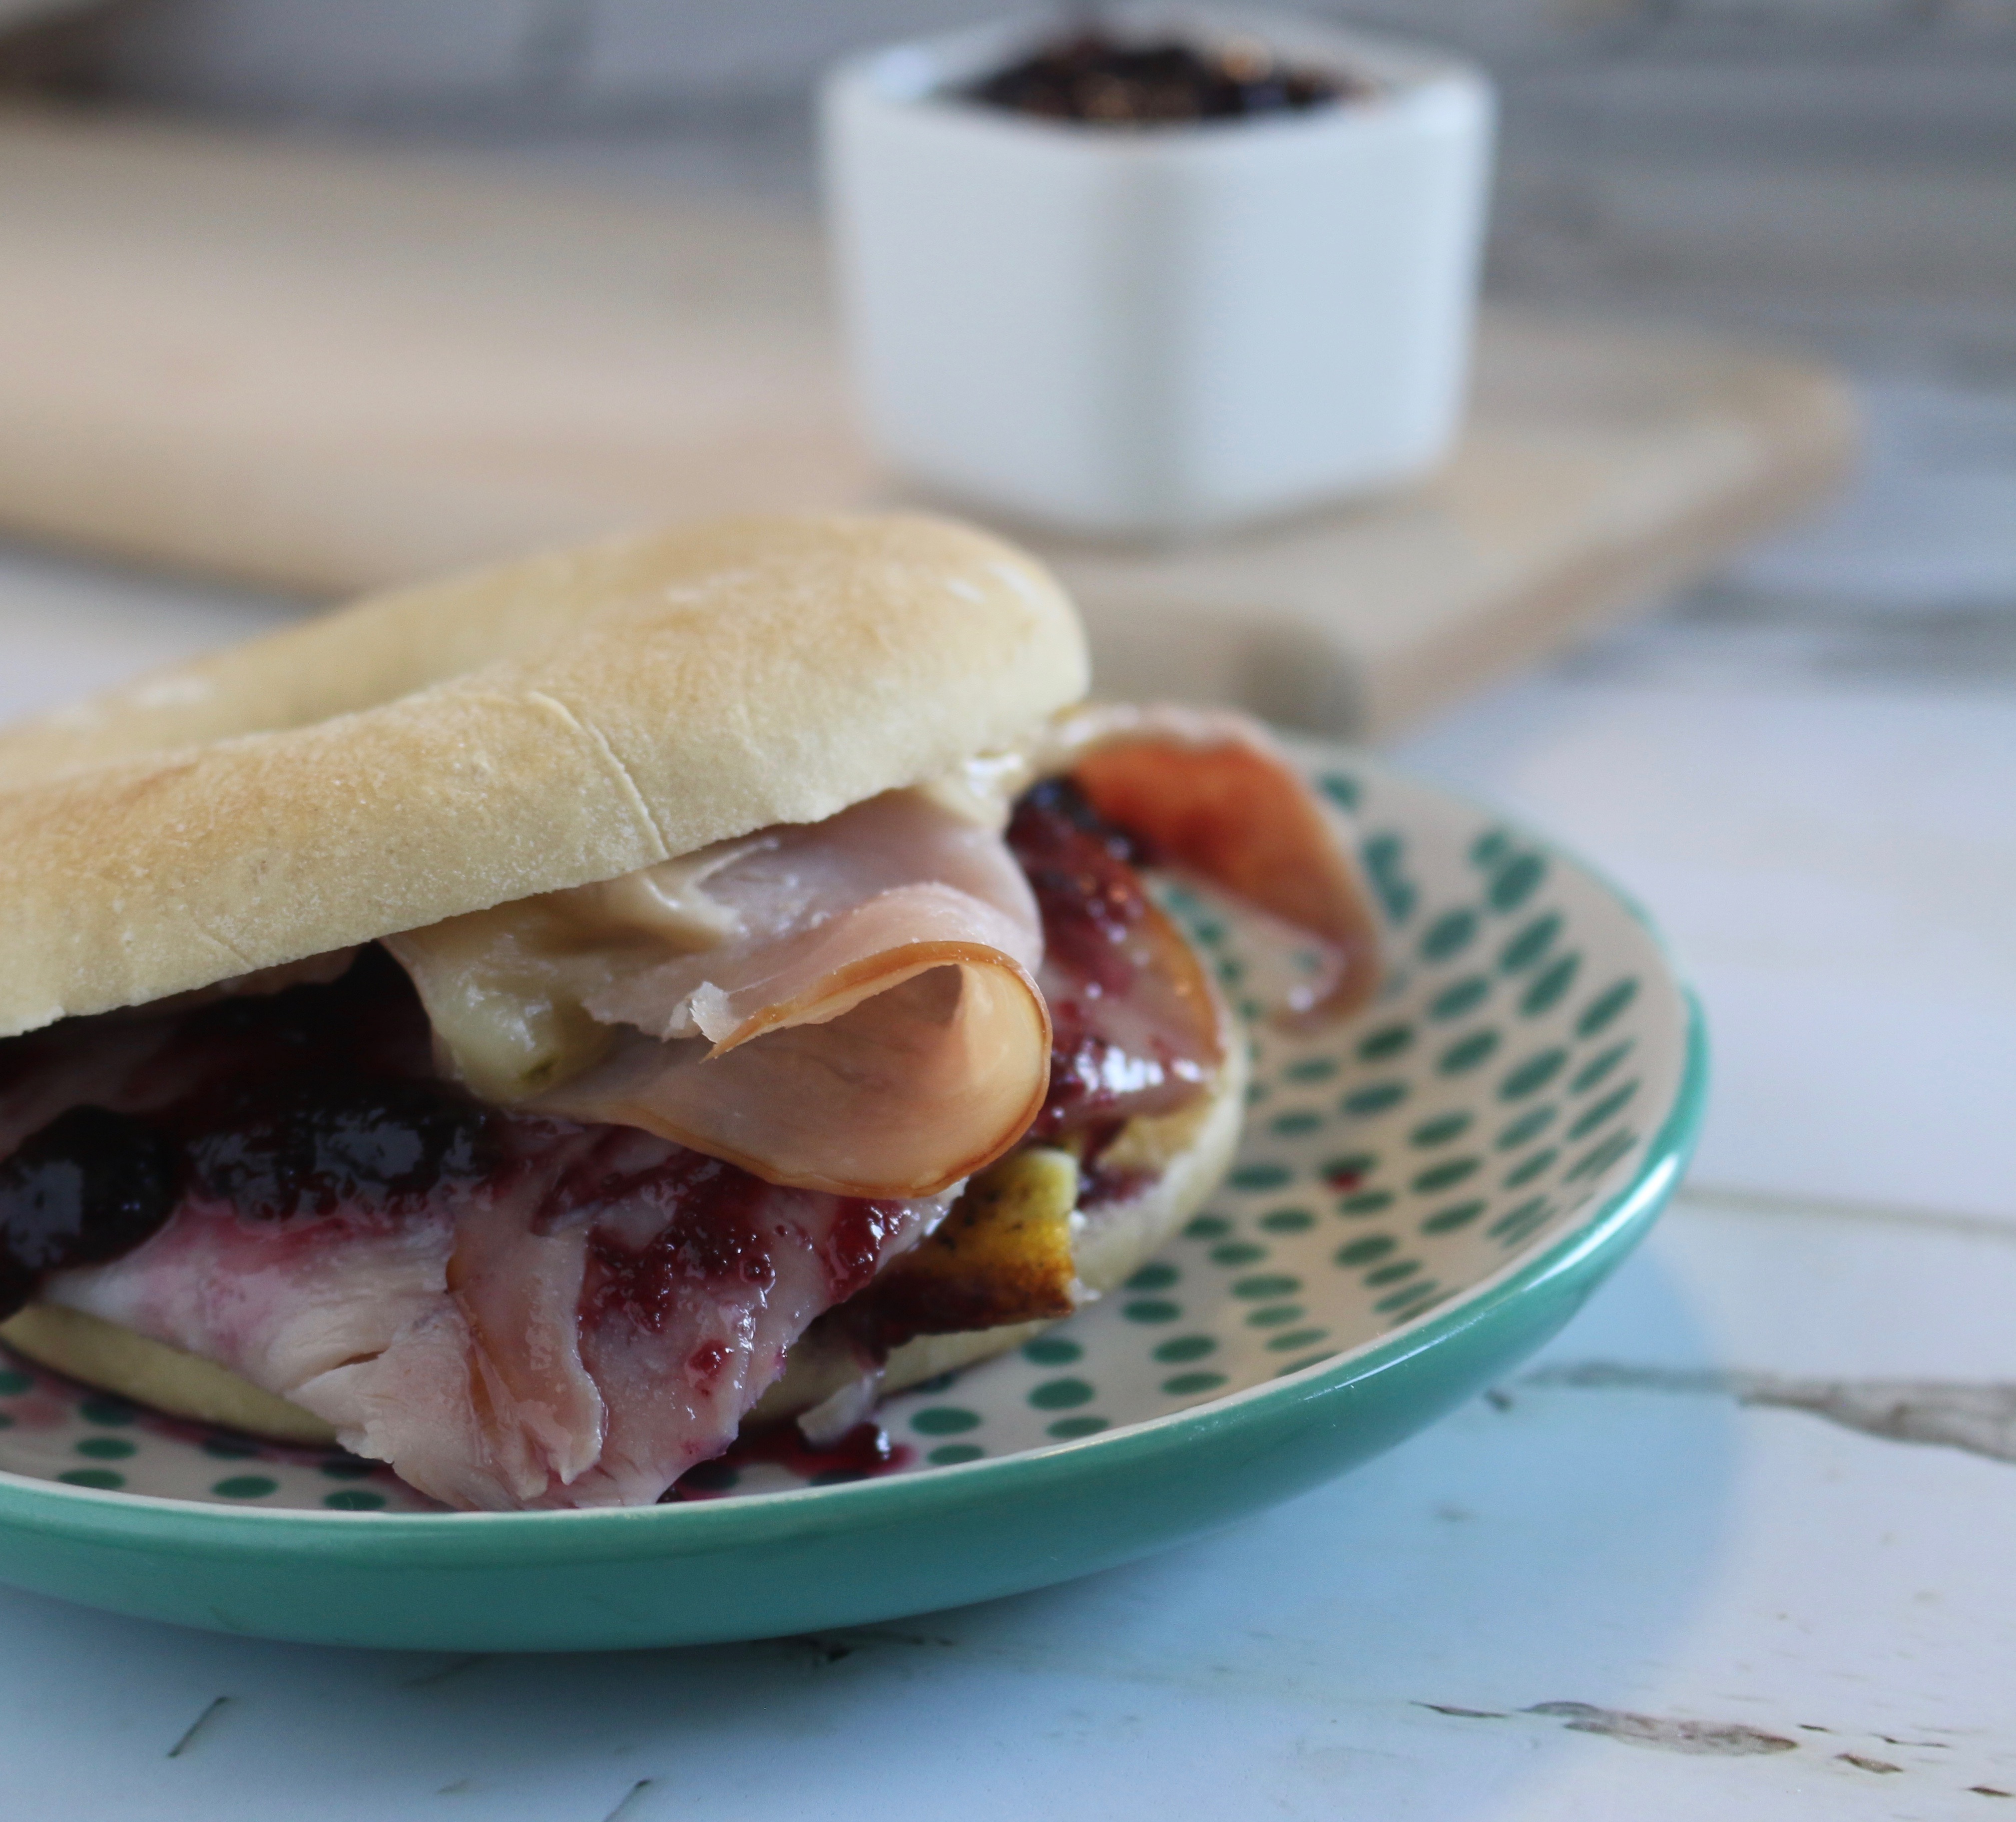 BREAKFAST SANDWICH RECIPES THE WHOLE FAMILY WILL LOVE